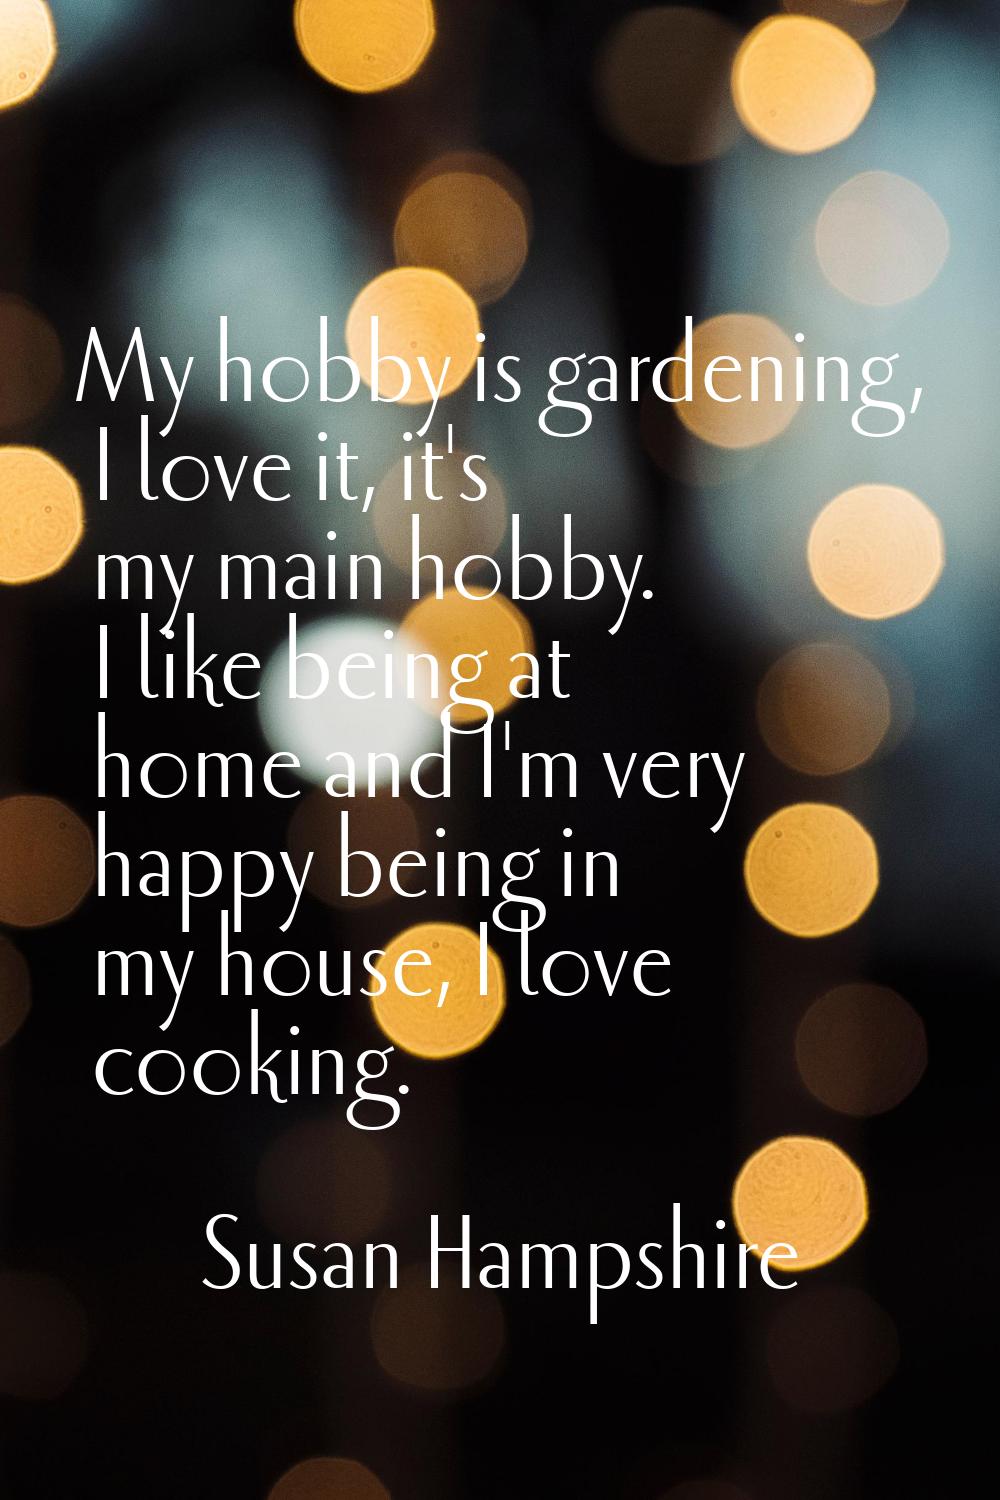 My hobby is gardening, I love it, it's my main hobby. I like being at home and I'm very happy being